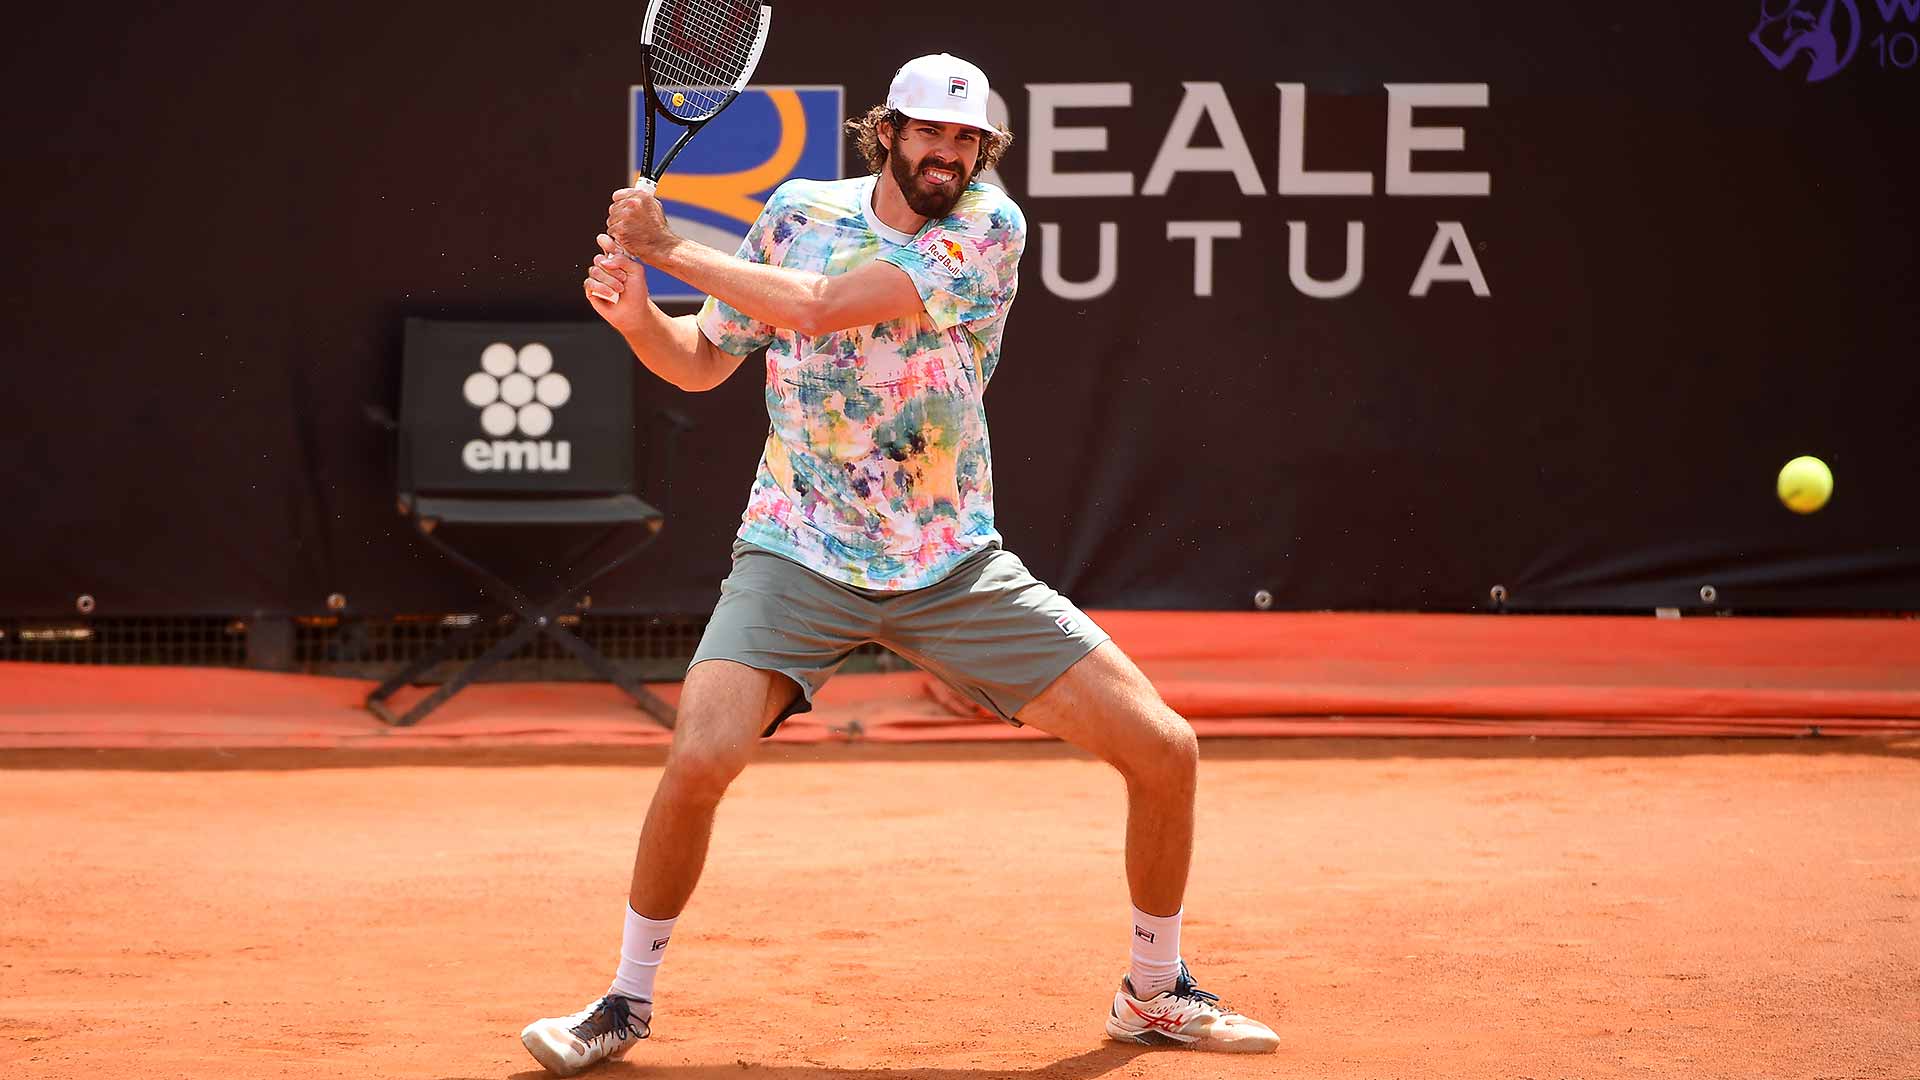 Back From Covid and 6 Straight Losses, Reilly Opelka Strikes It Big In Rome ATP Tour Tennis